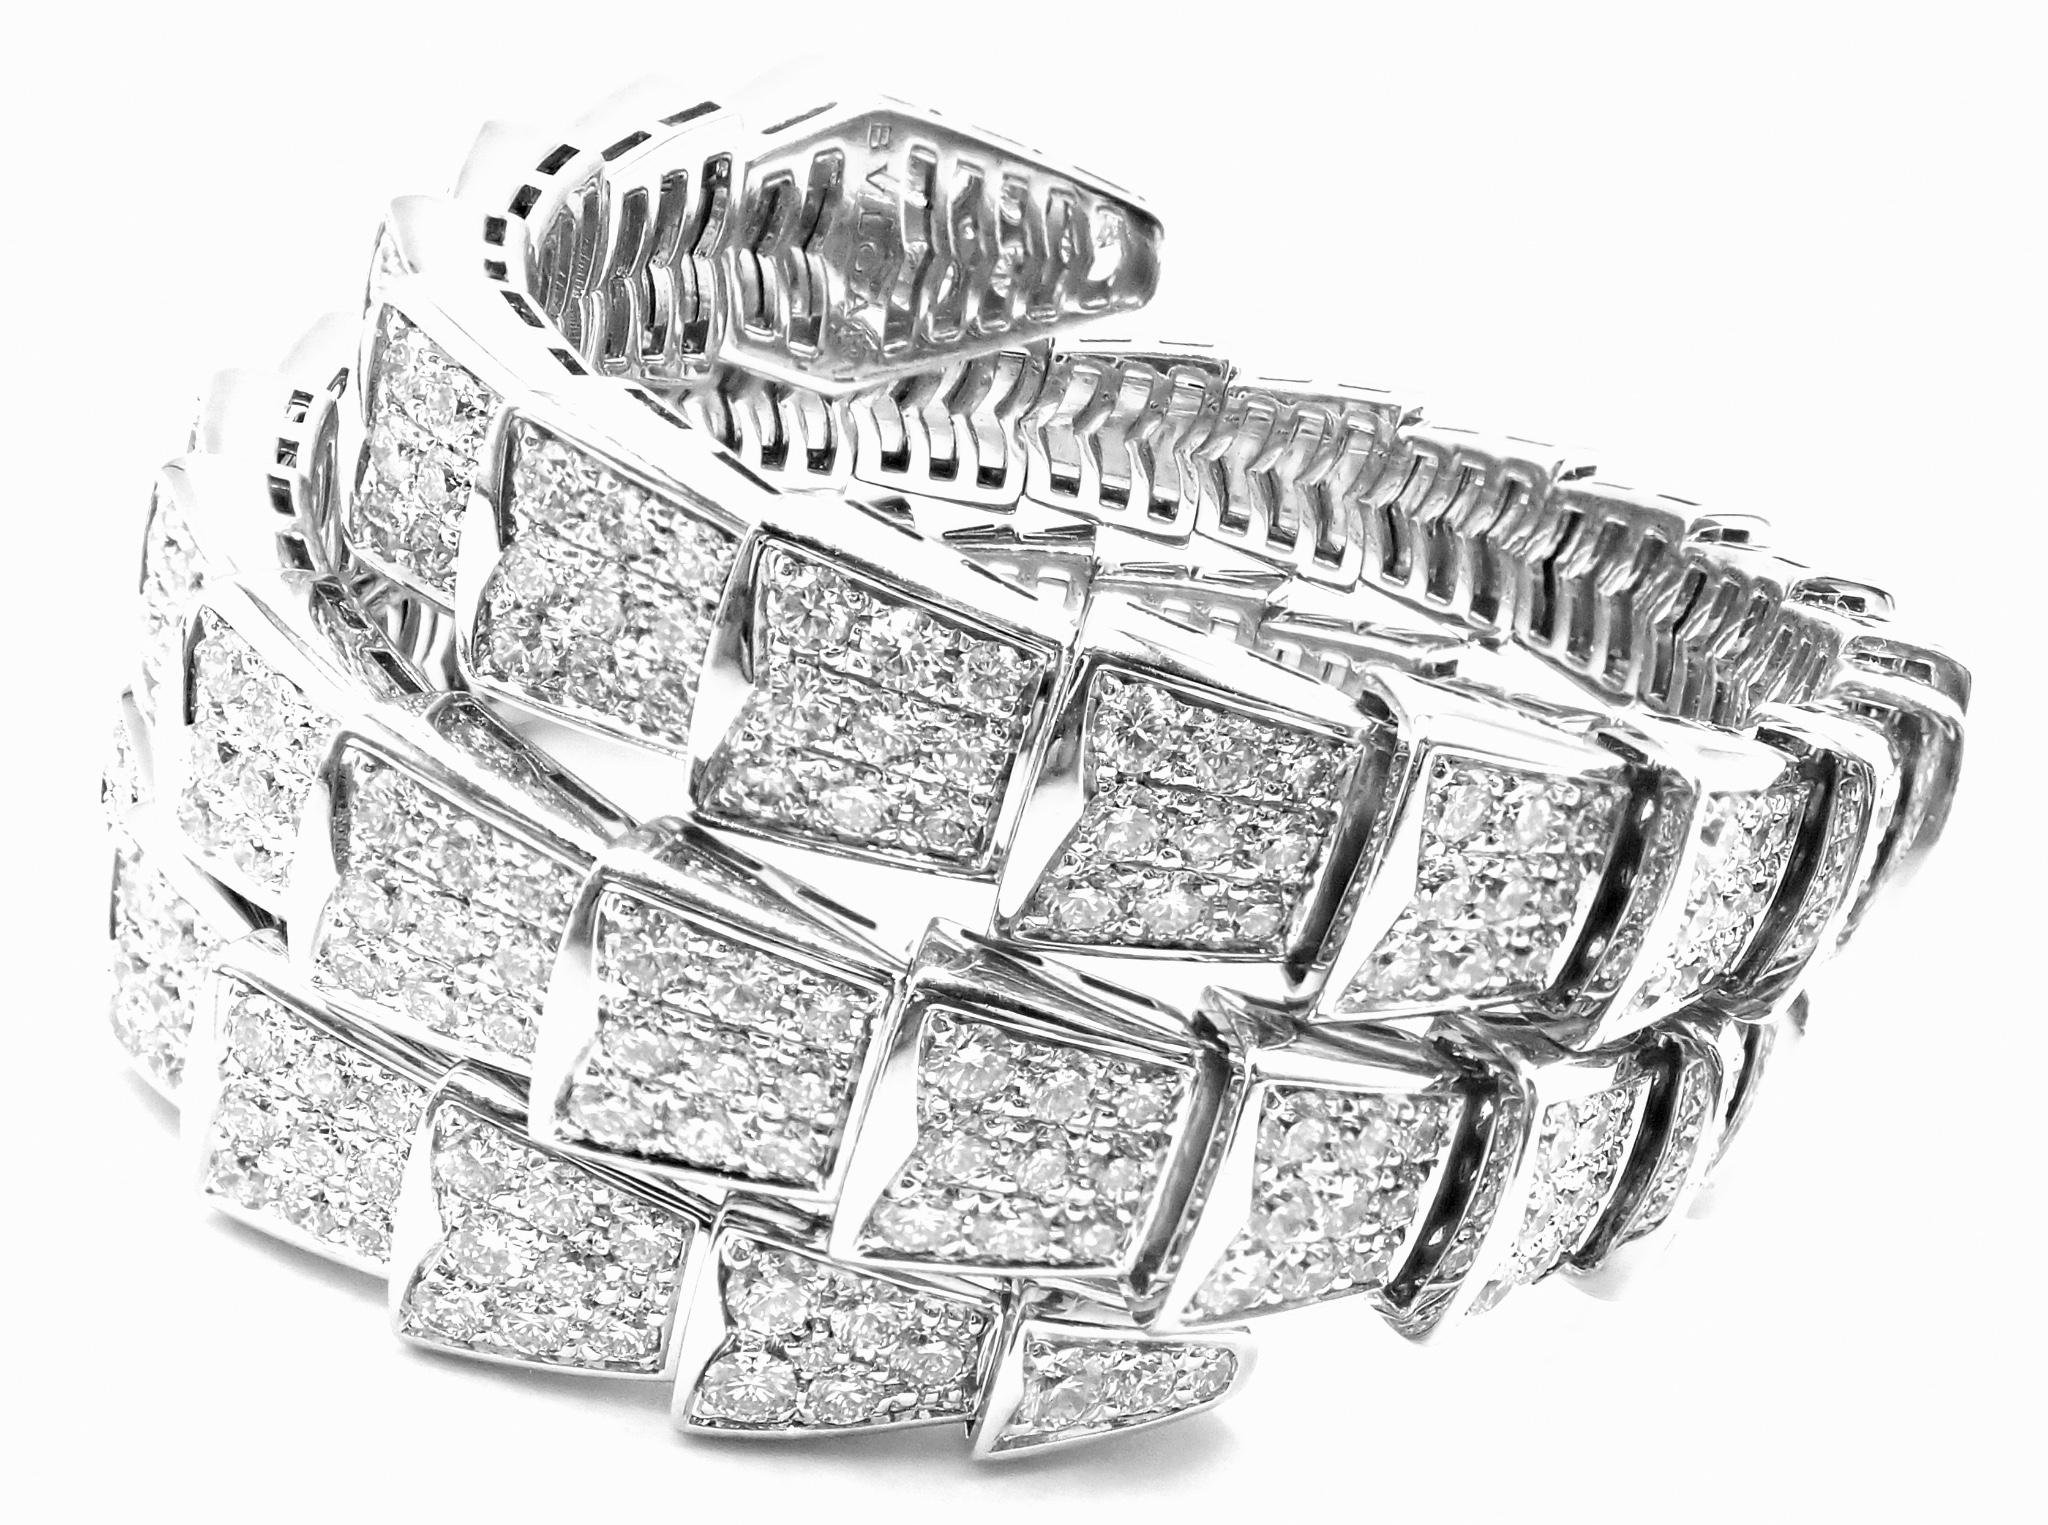 18k White Gold Diamond Serpenti Viper Snake Two-Coil Bangle Bracelet by Bulgari. 
With Round brilliant cut diamonds VVS1 clarity, E color total weight approximately 15.03ct
The Bvlgari Serpenti two-coil bracelet, made from 18k white gold, exudes